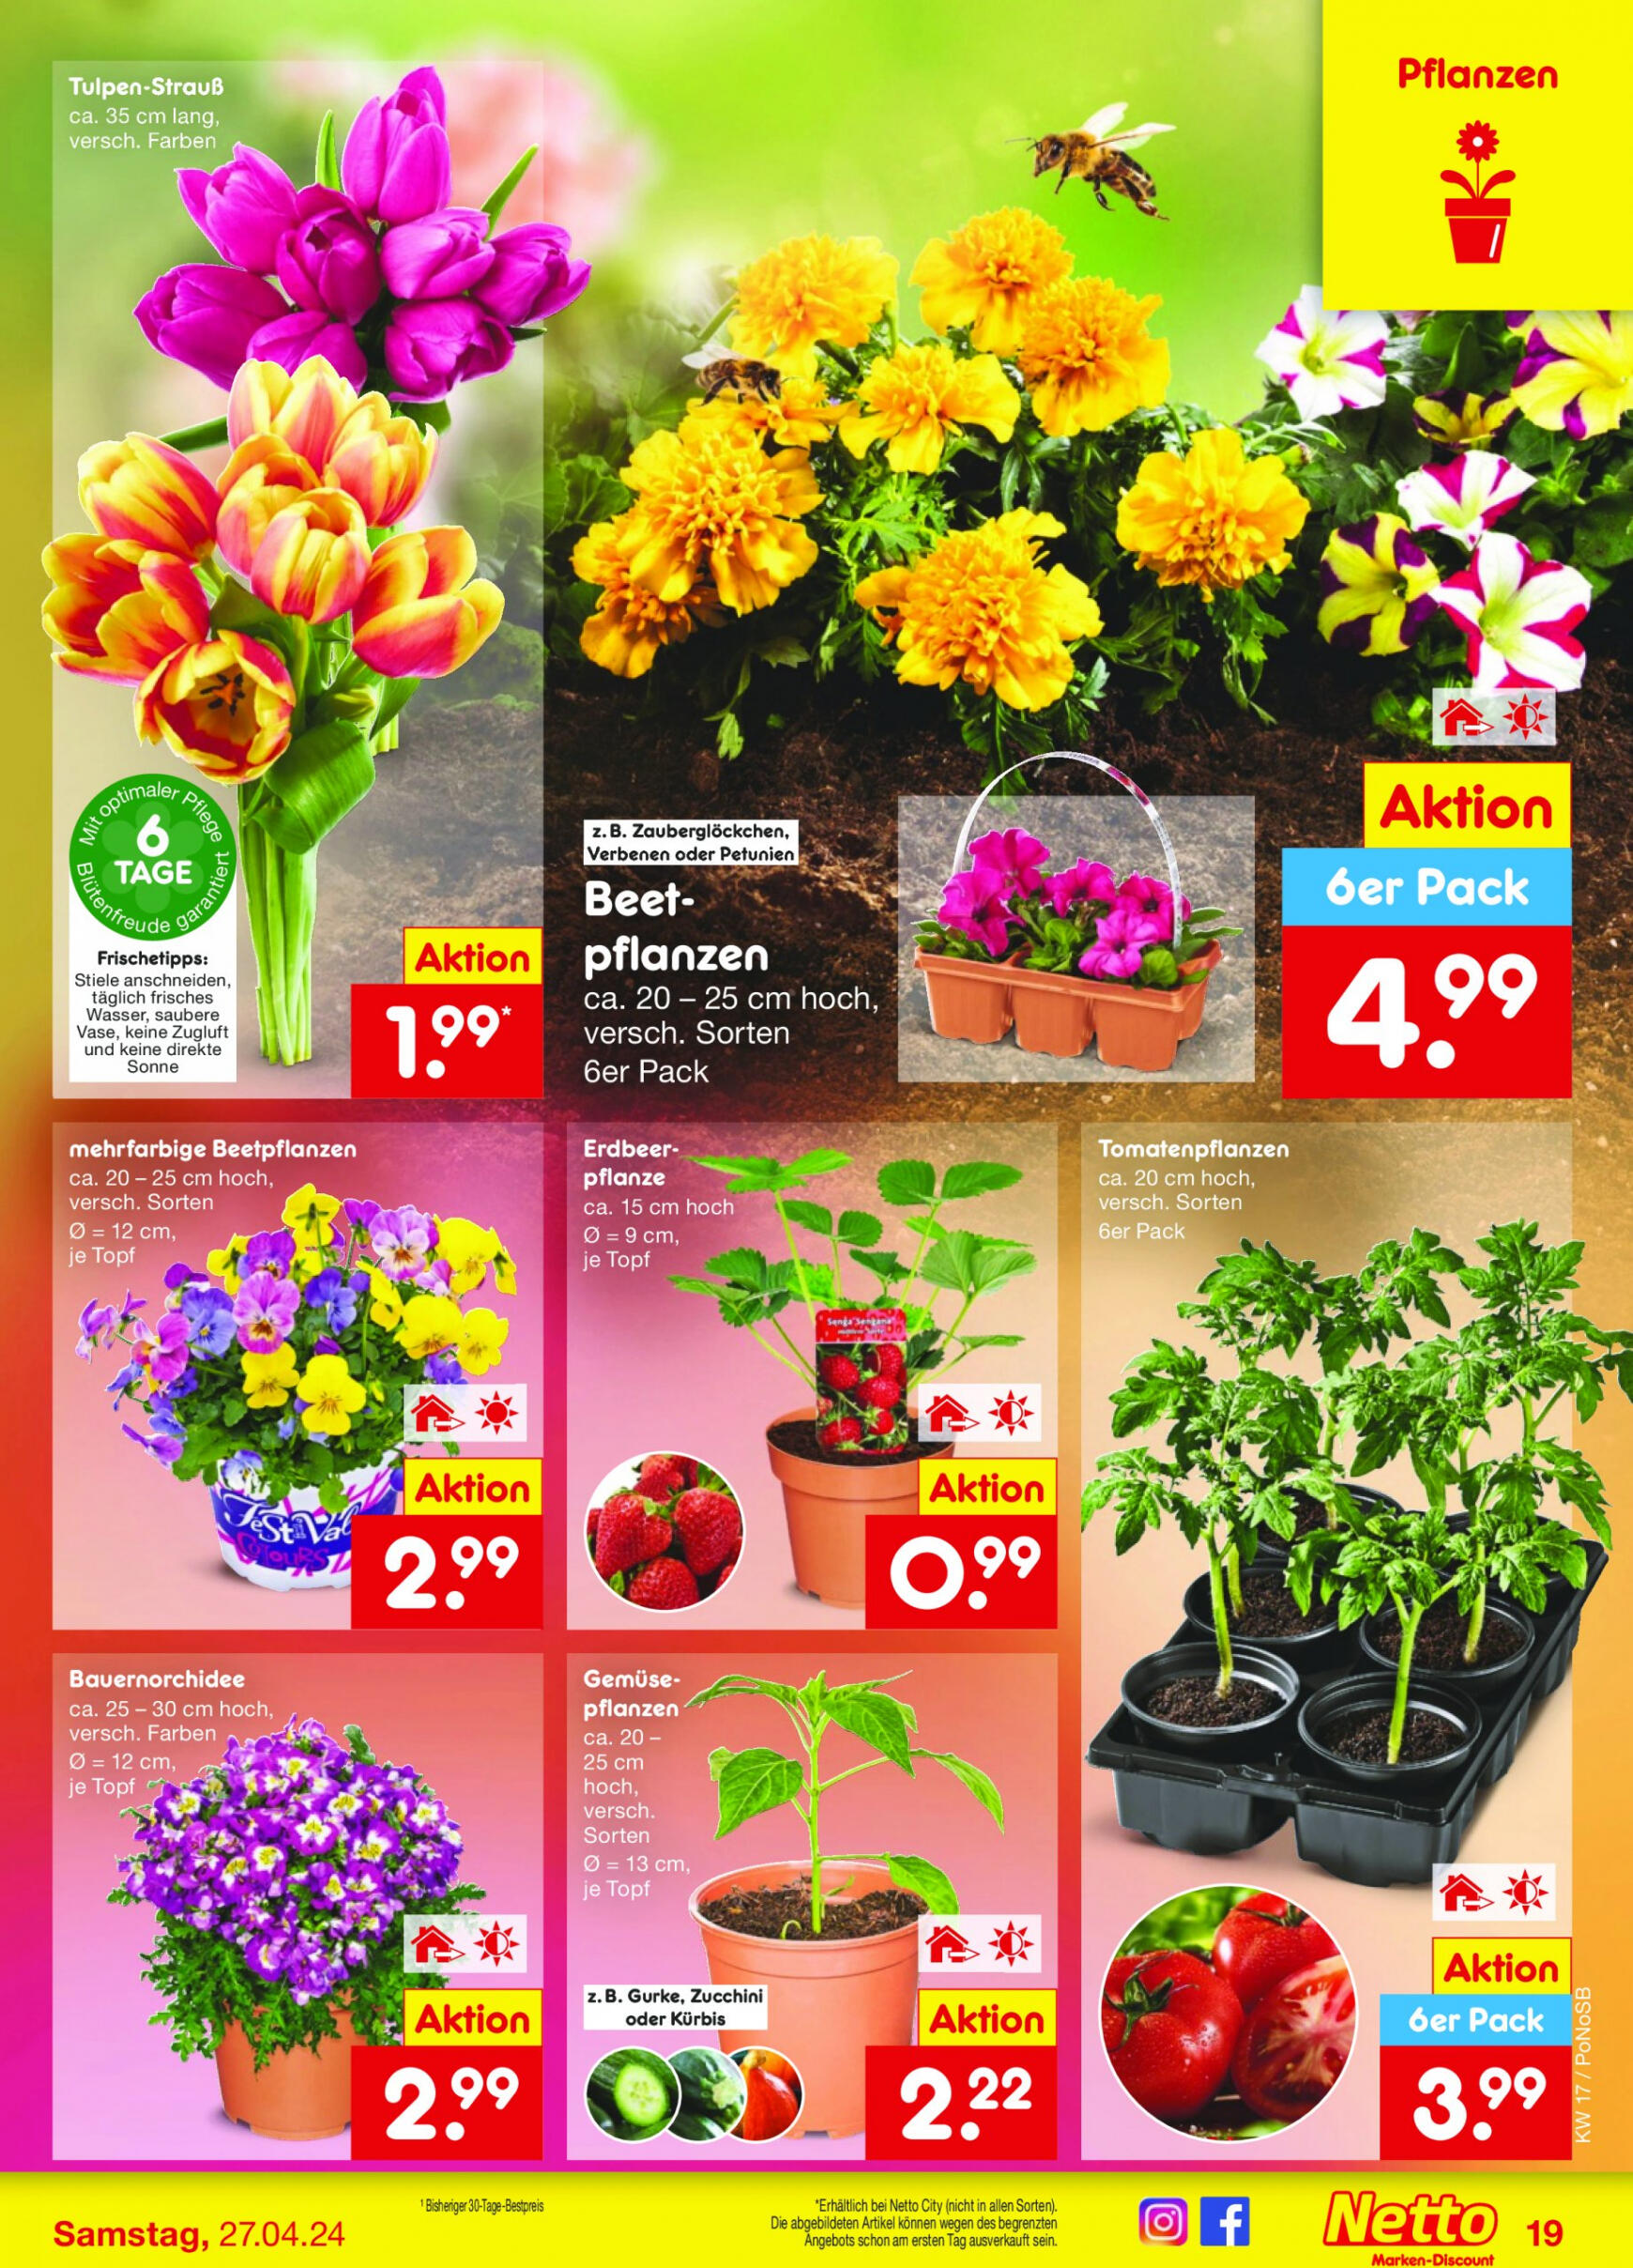 netto - Flyer Netto aktuell 22.04. - 27.04. - page: 21